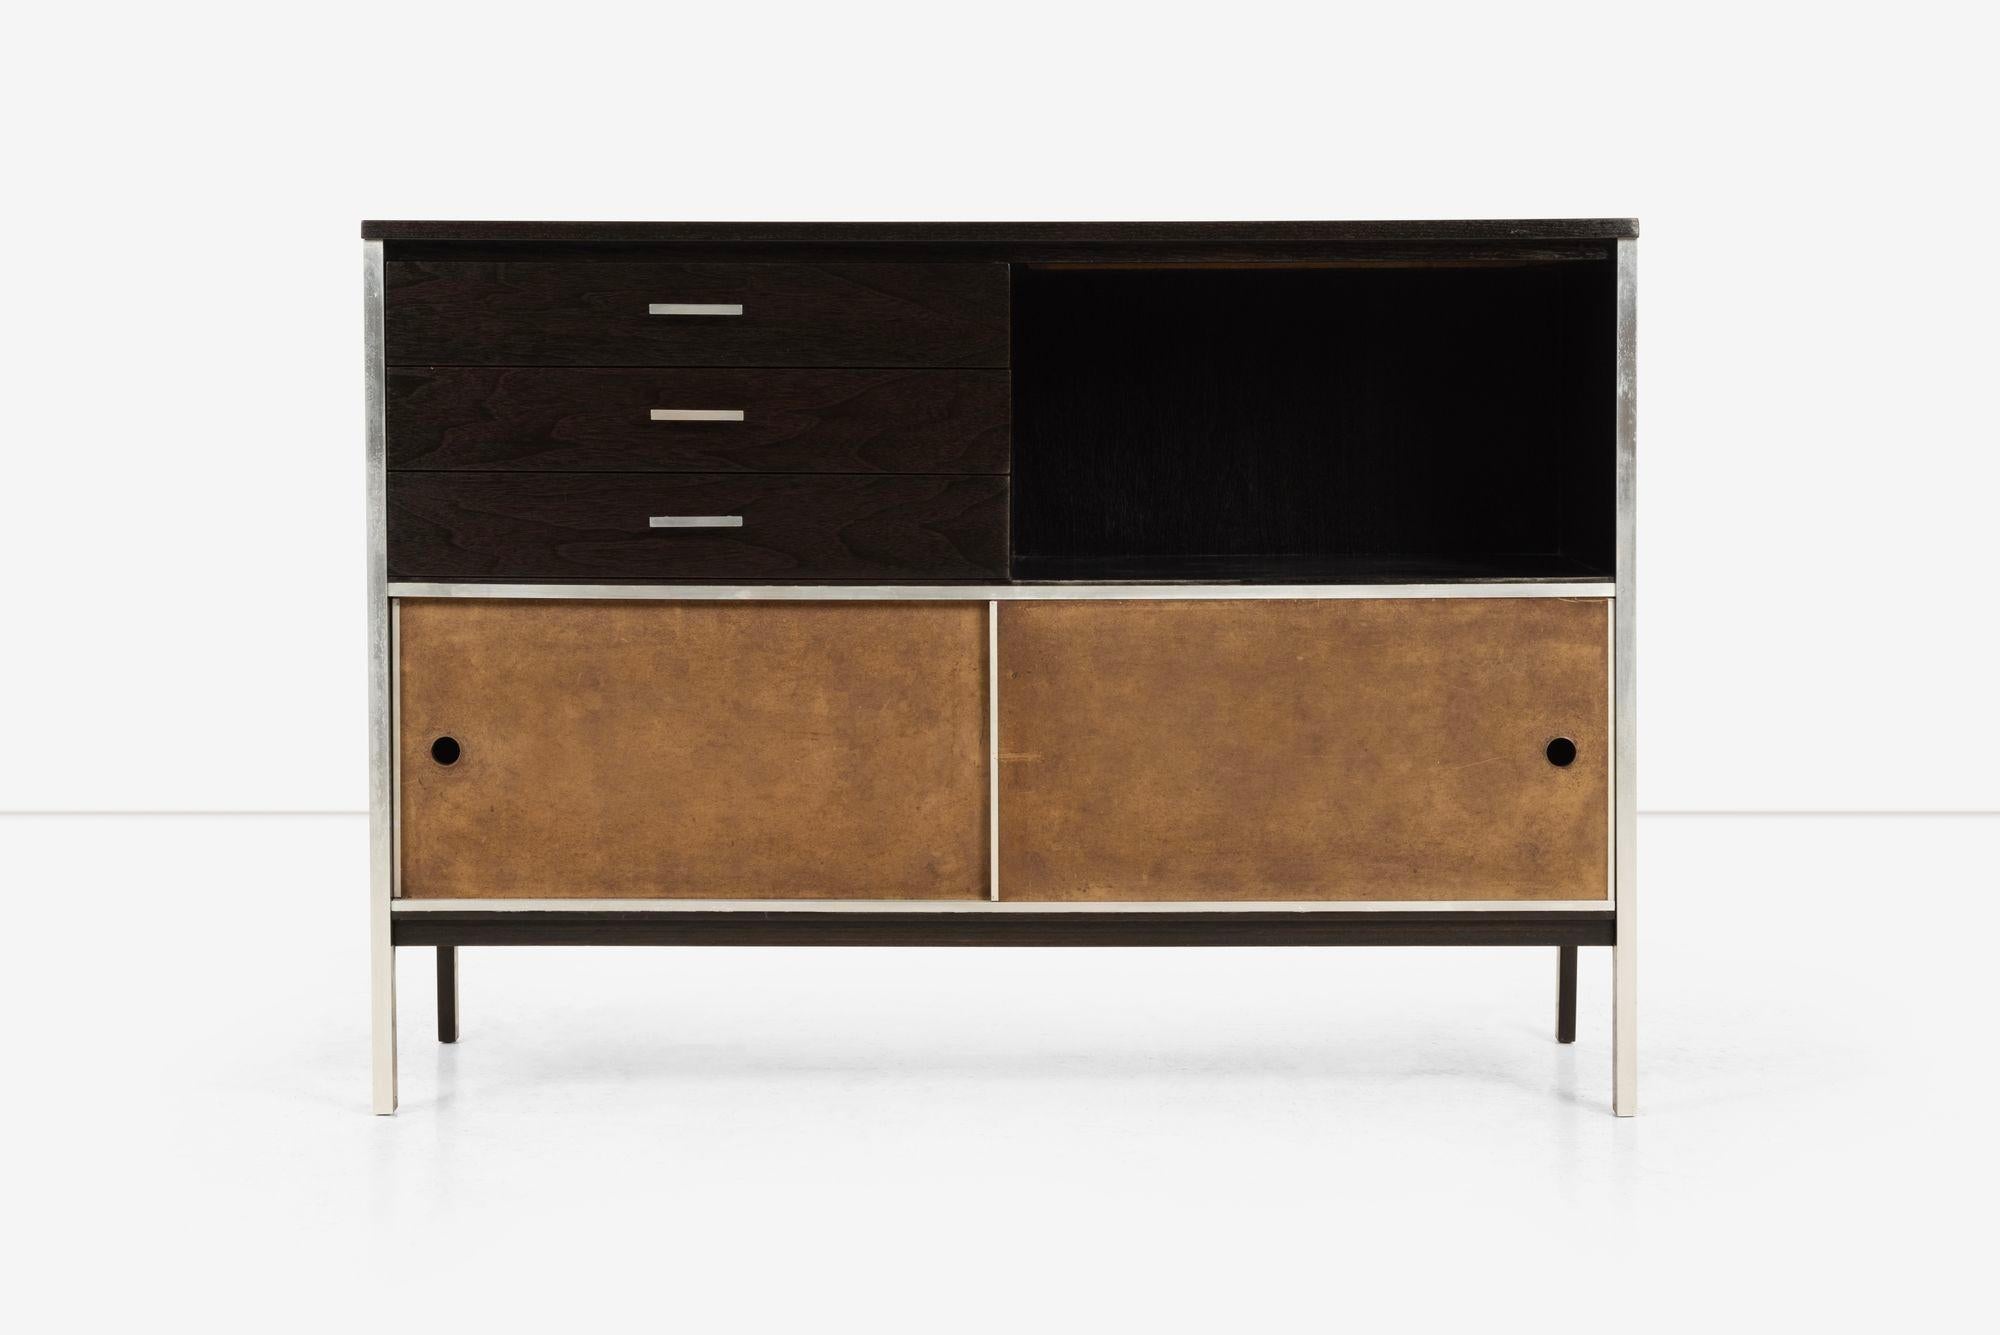 Paul McCobb Storage Unit for Calvin Furniture features a custom matte blackened finish over walnut.
Three drawers, an open display cubby, and sliding doors for extra storage. Refinished with a matte backend oil finish, brushed aluminum design